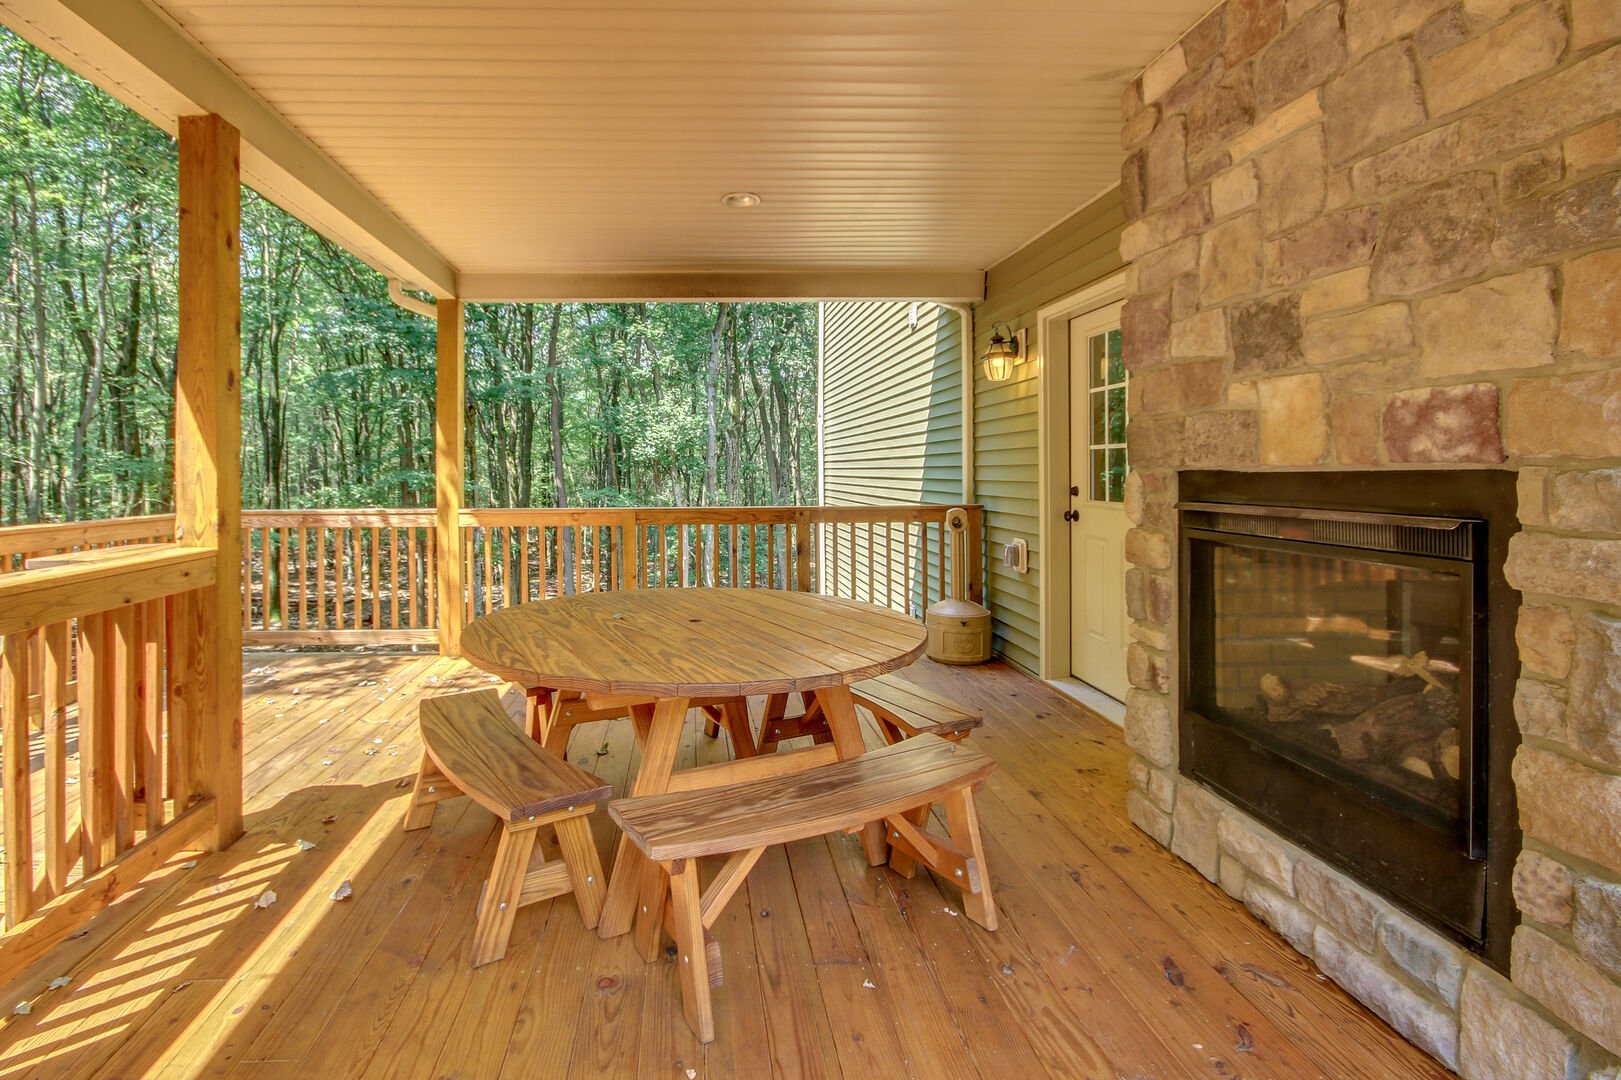 The outdoor fireplace located on the porch, next to a round picnic table.